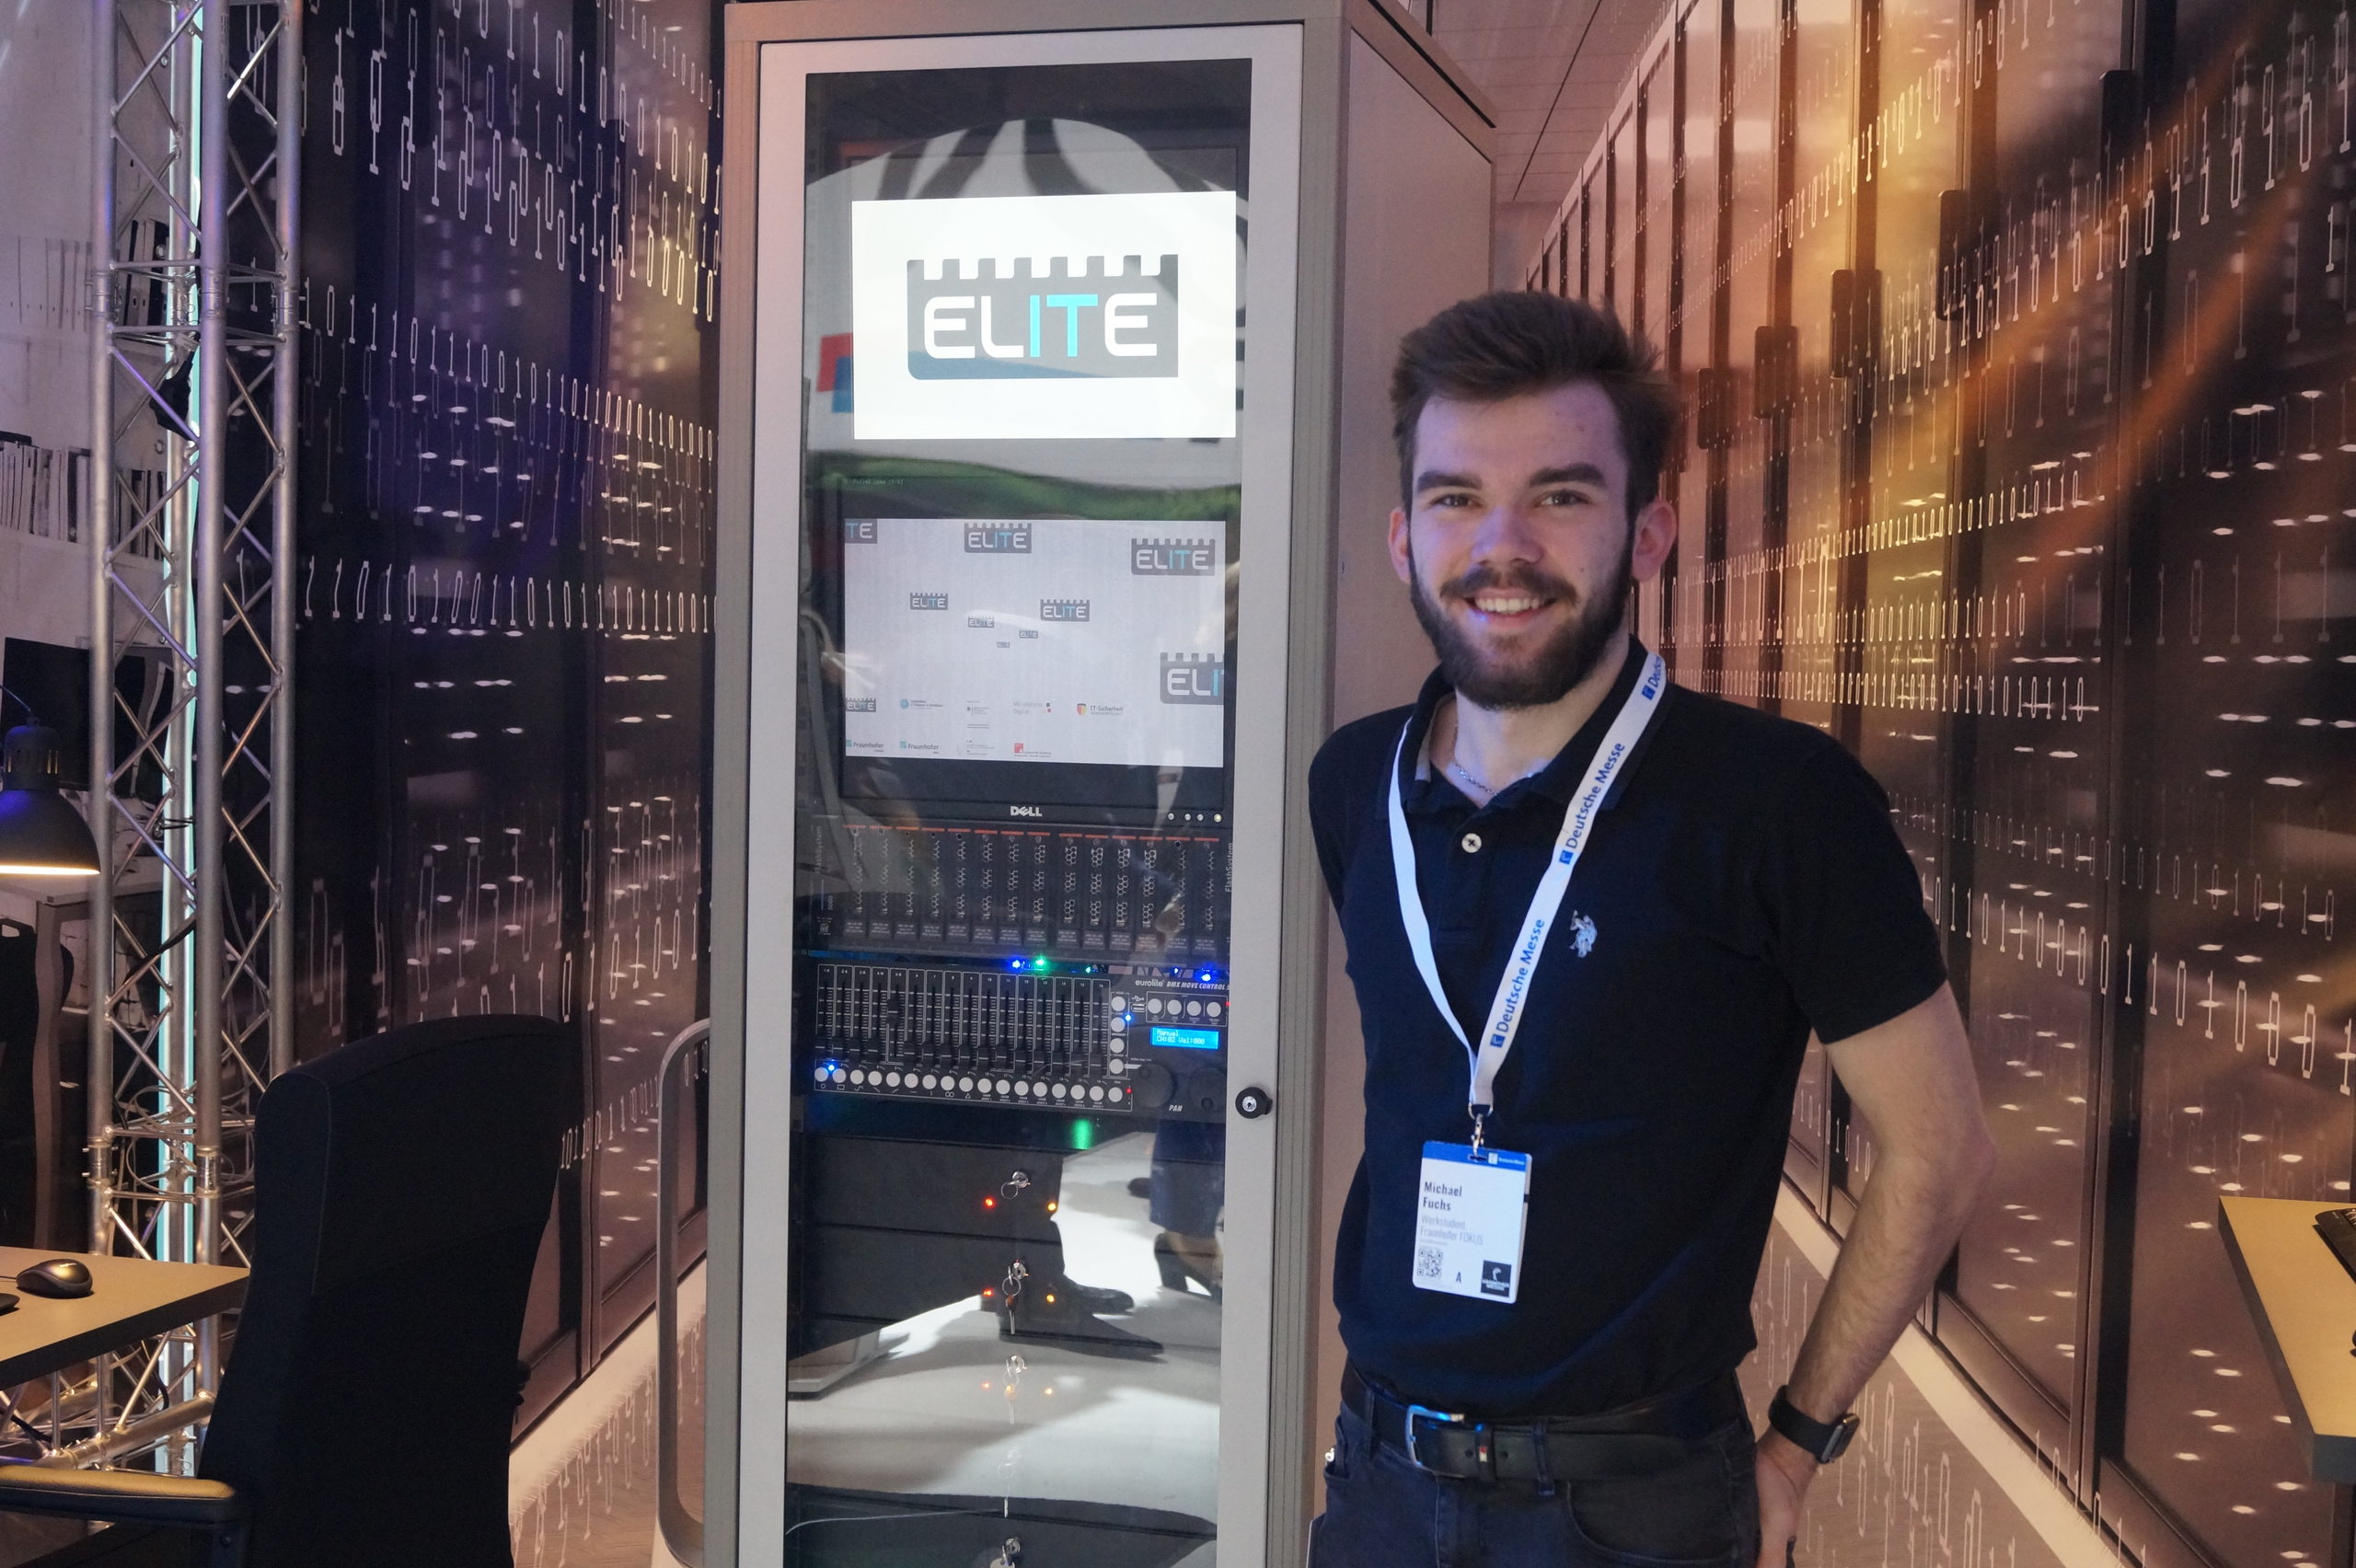 A member of the project team stands at the ELITE booth at the Hannover Messe.